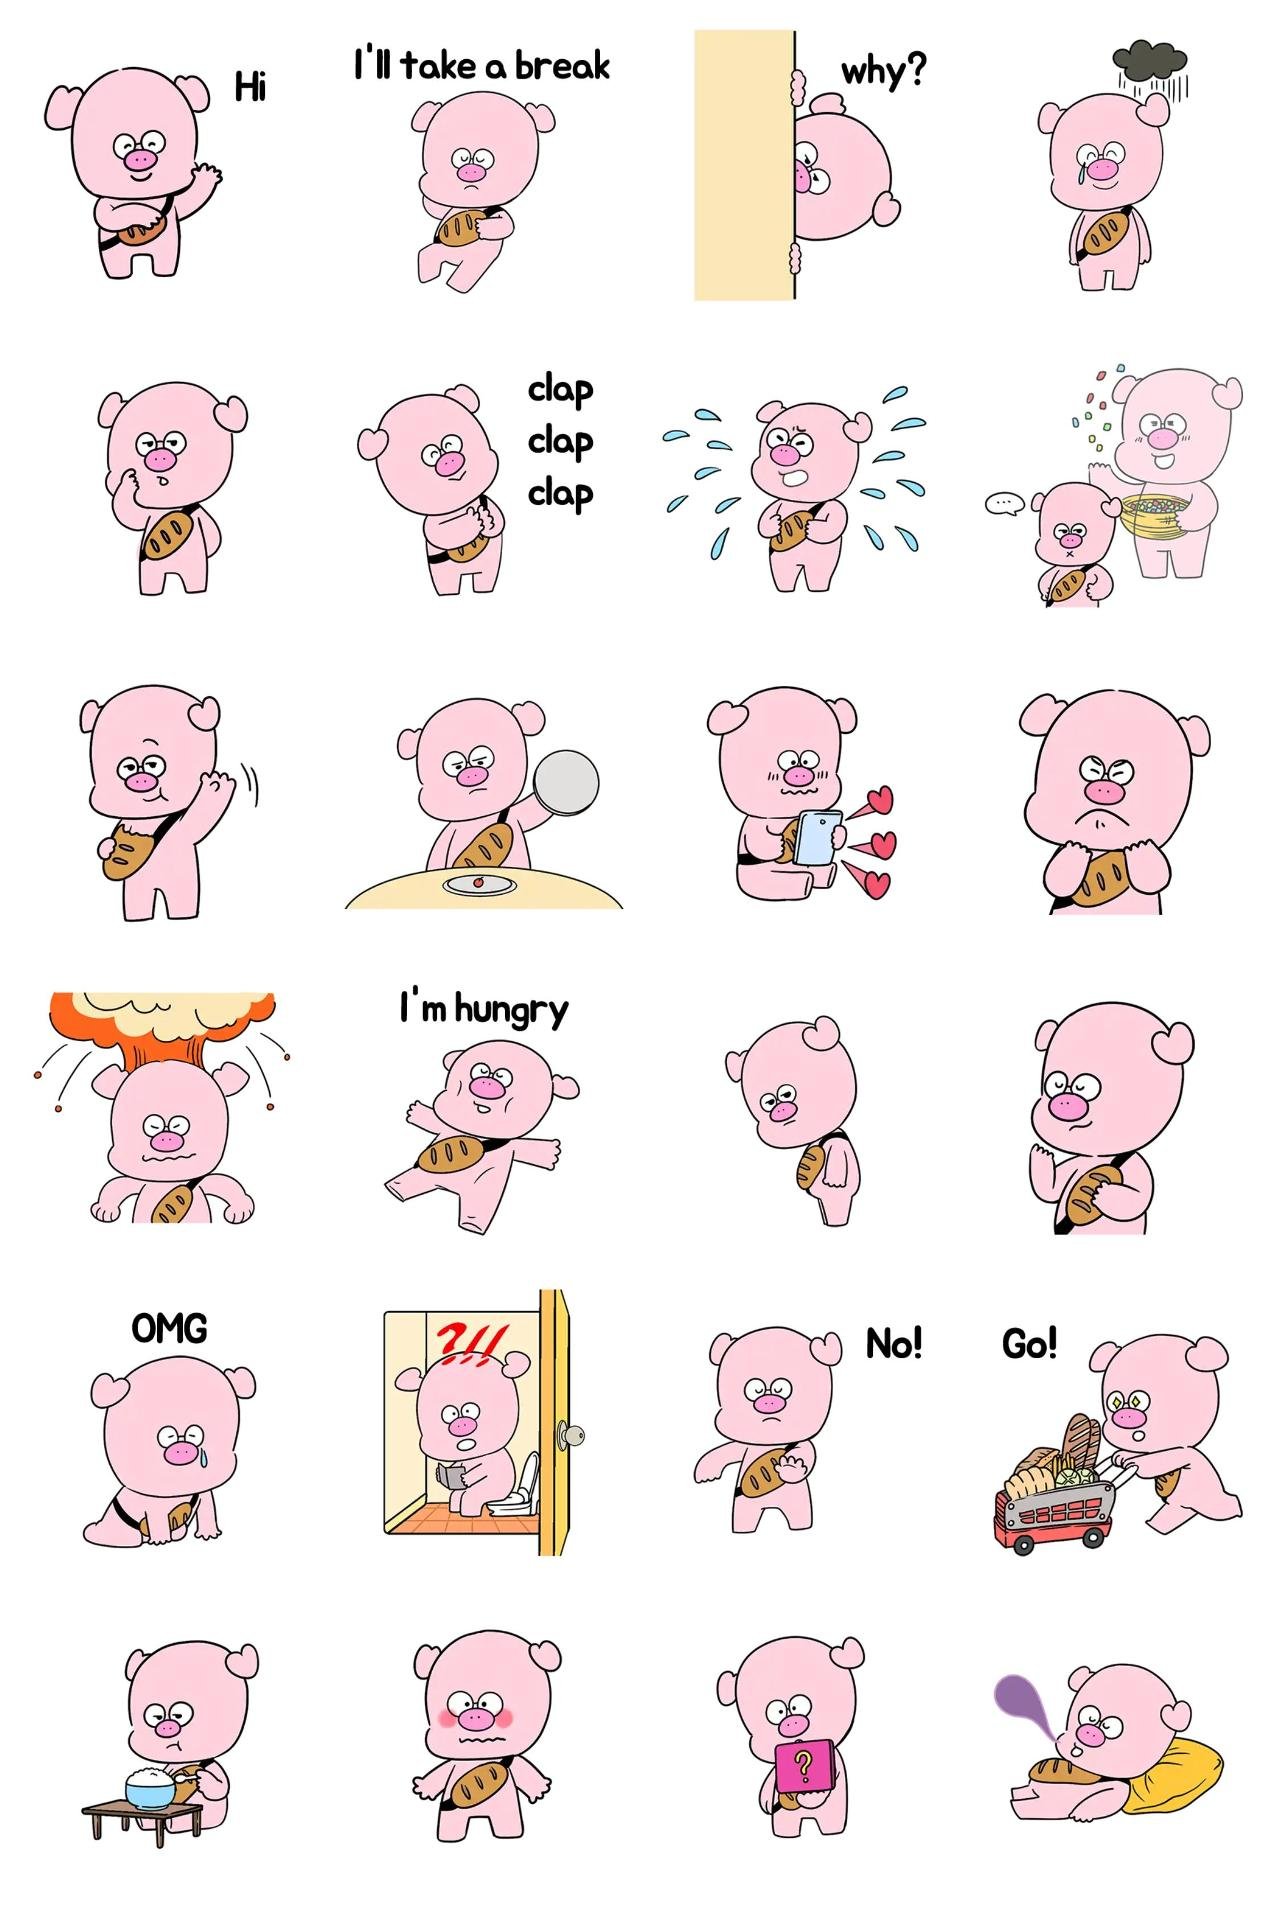 piglove's life Animals sticker pack for Whatsapp, Telegram, Signal, and others chatting and message apps